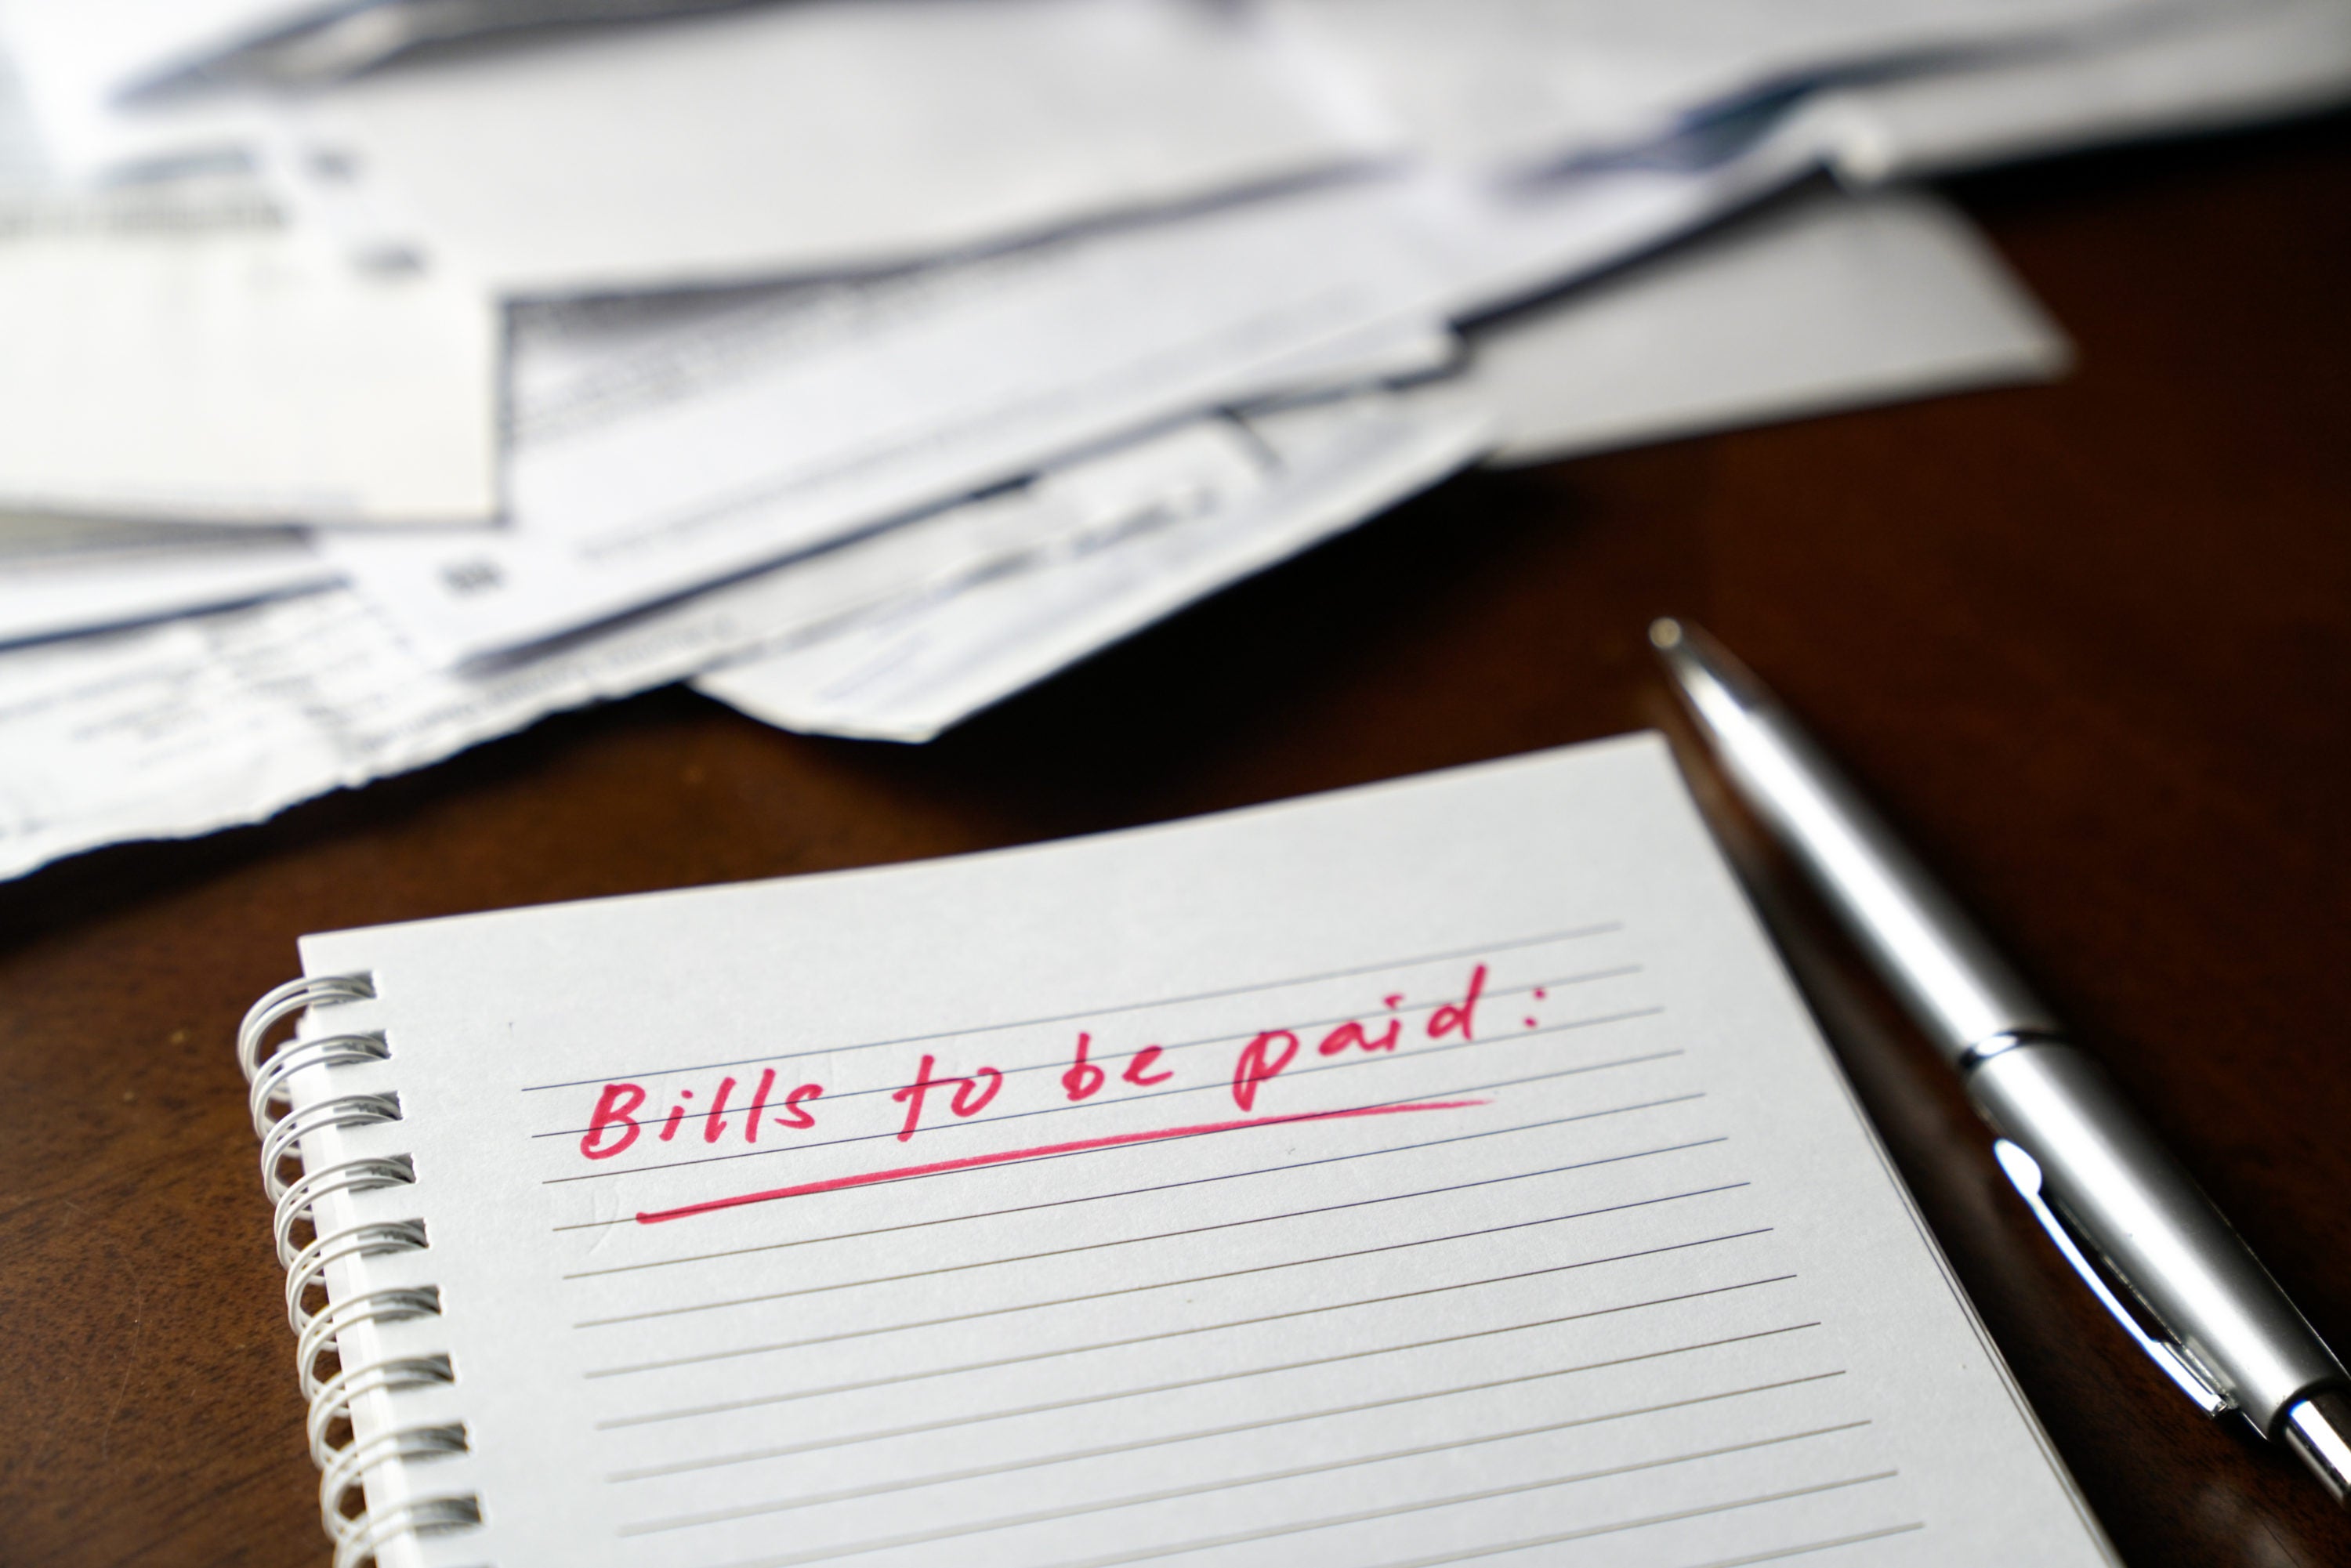 Bills to be paid written on notebook